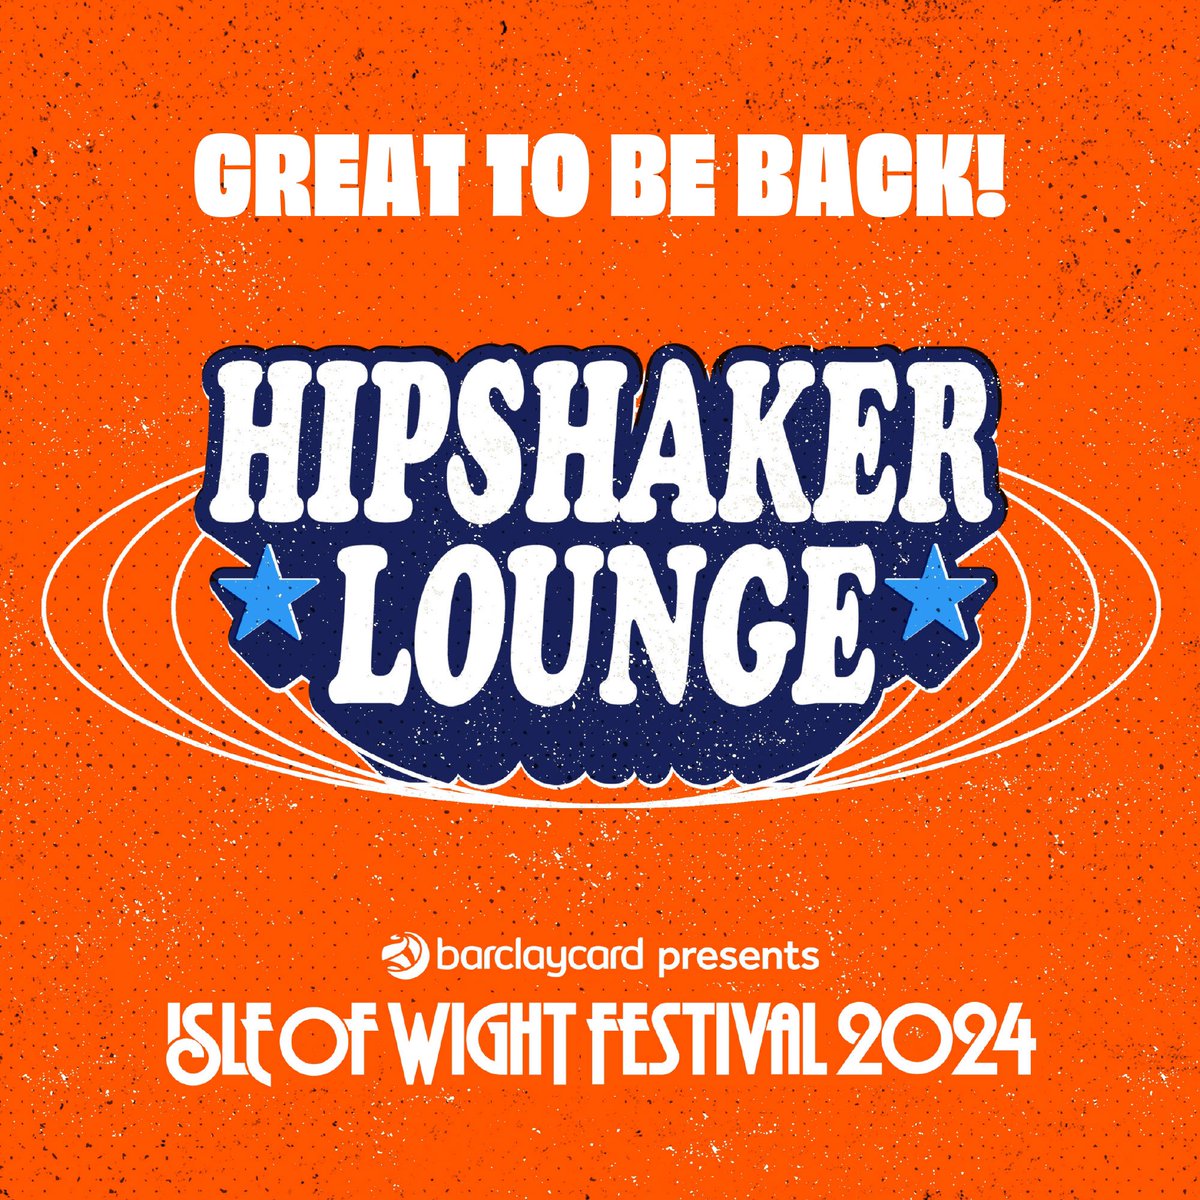 Keep ‘em peeled for an Isle of Wight Festival announcement around 5pm tomorrow 😁
@IsleOfWightFest 

#IOW2024
#BarclaycardxIOW
#Hipshaker
#HipshakerLounge